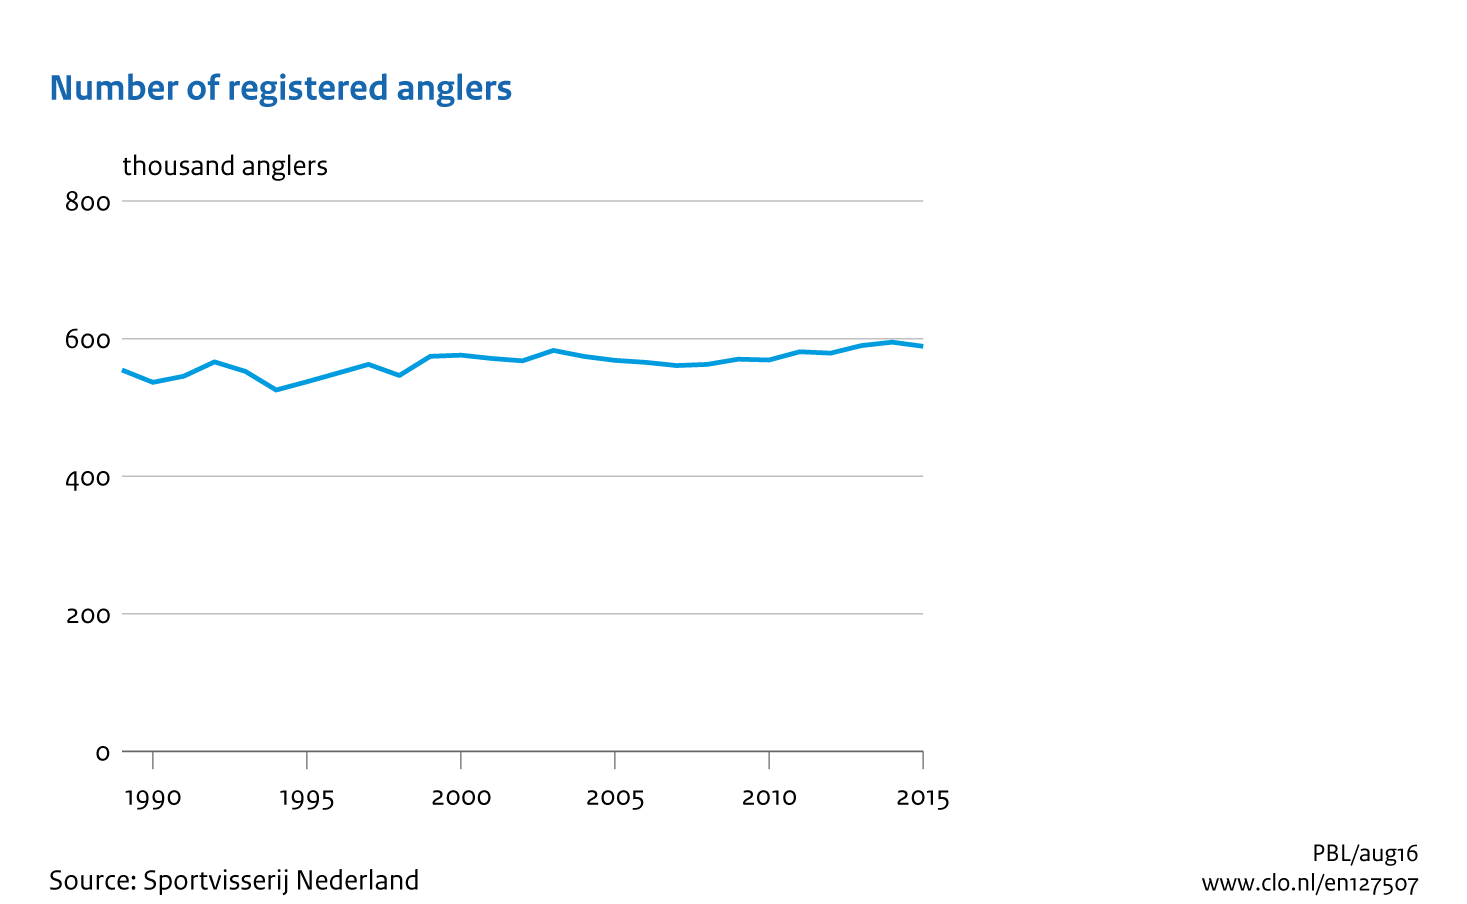 Image Number of anglers. The image is further explained in the text.